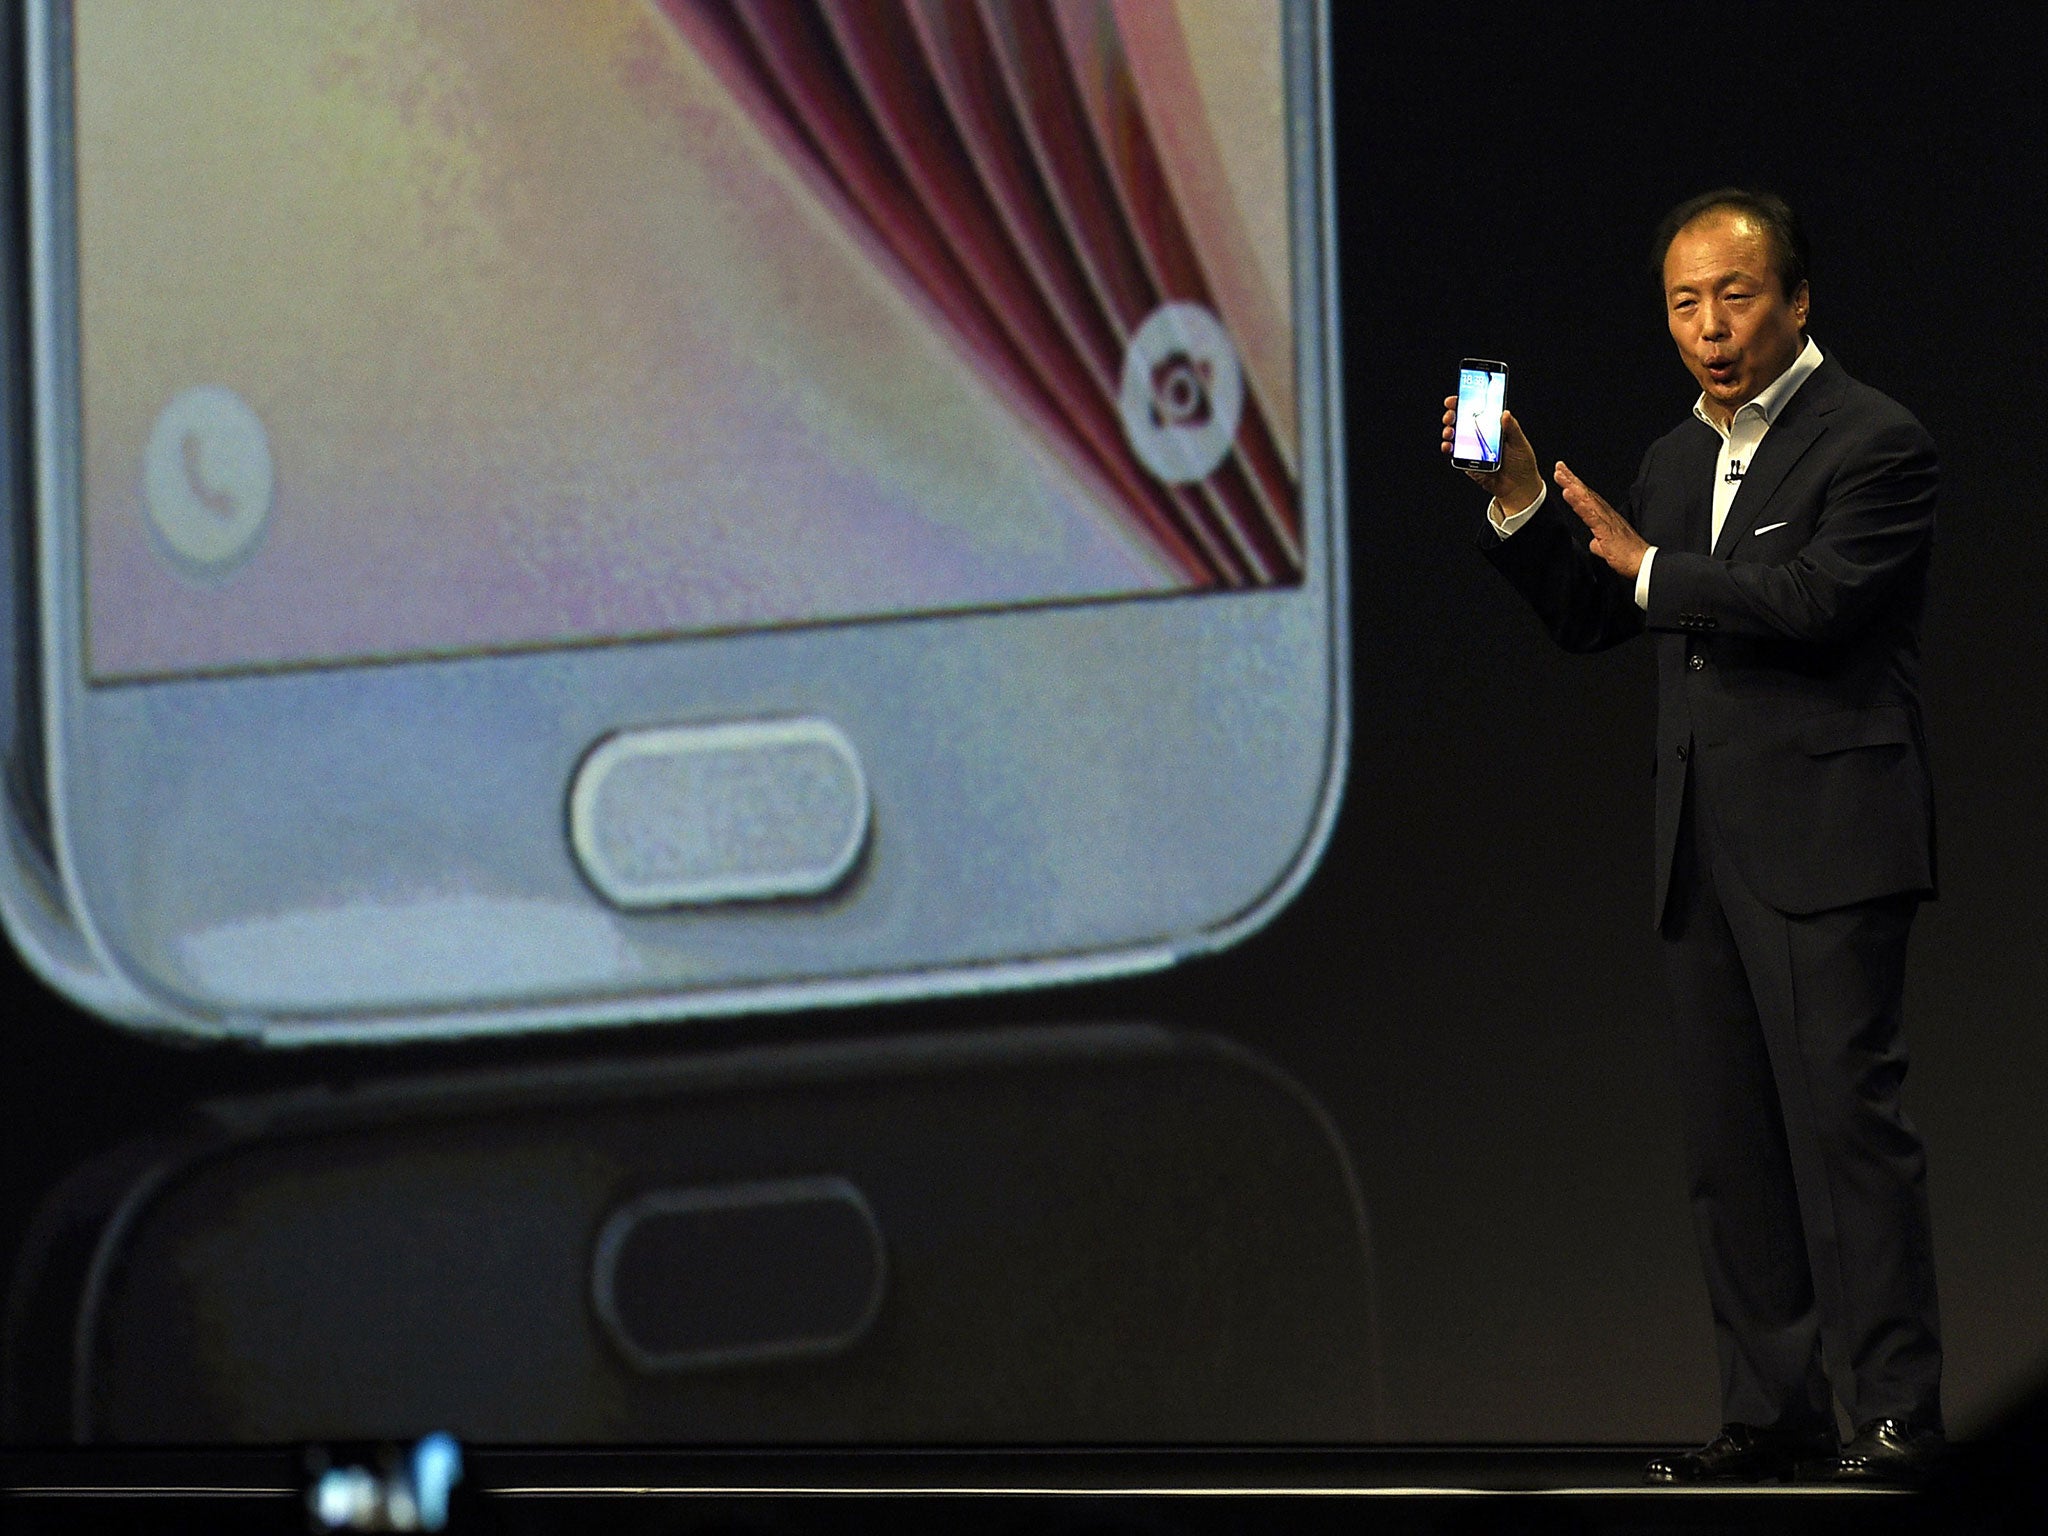 Samsung Electronics President and CEO JK Shin presents the Samsung Galaxy S6 during the 2014 Mobile World Congress in Barcelona